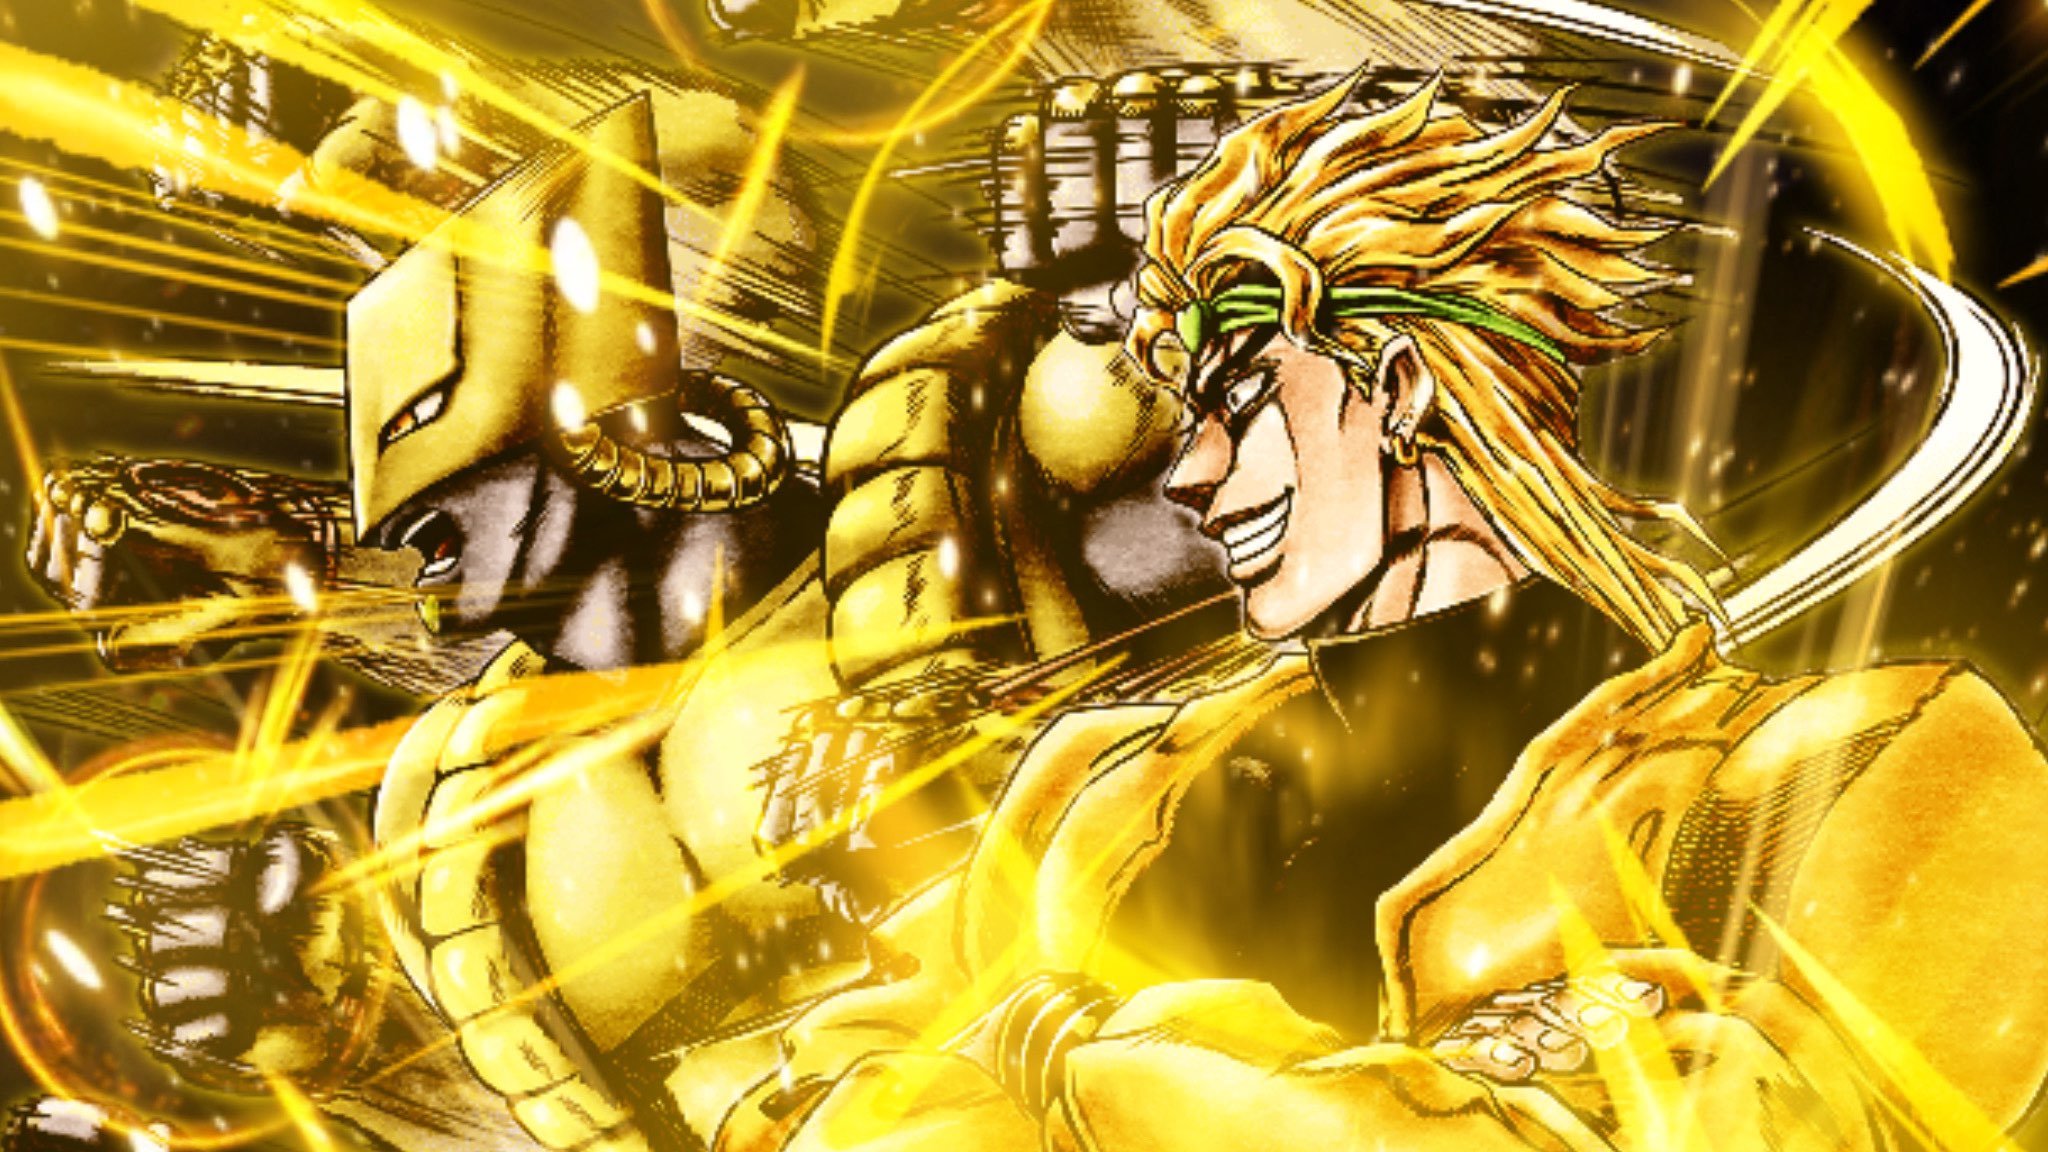 Potarax Strength That Surpasses The World Dio Icon Pc Background Phone Wallpaper Stardustcrusaders Dio Theworld T Co Stbesgywhm Twitter